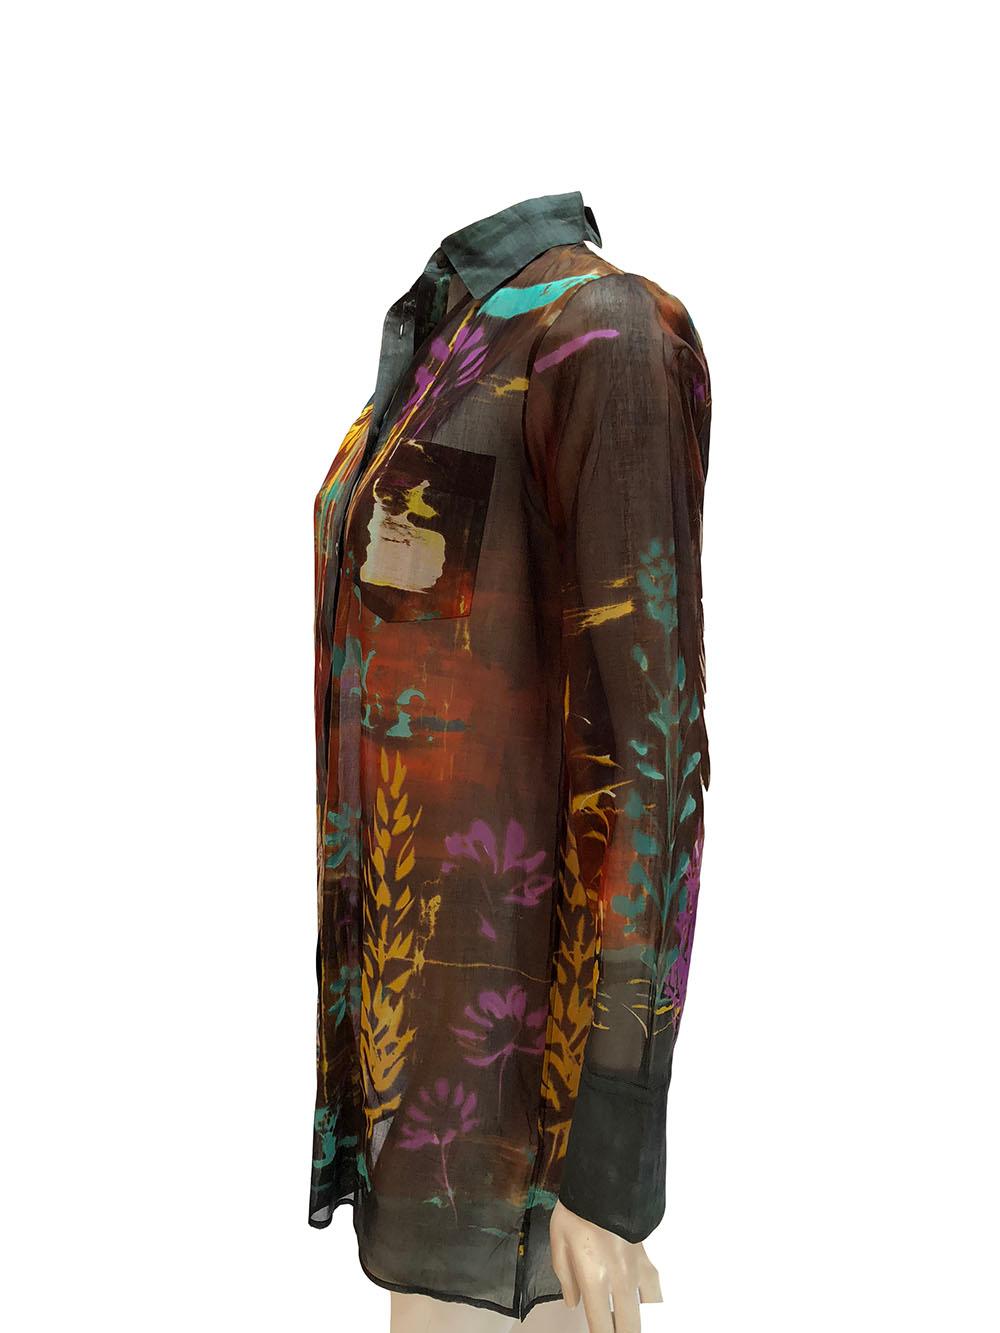 Valentino sheer button down with abstract water color print. Beautiful fall colors. Size 44. 